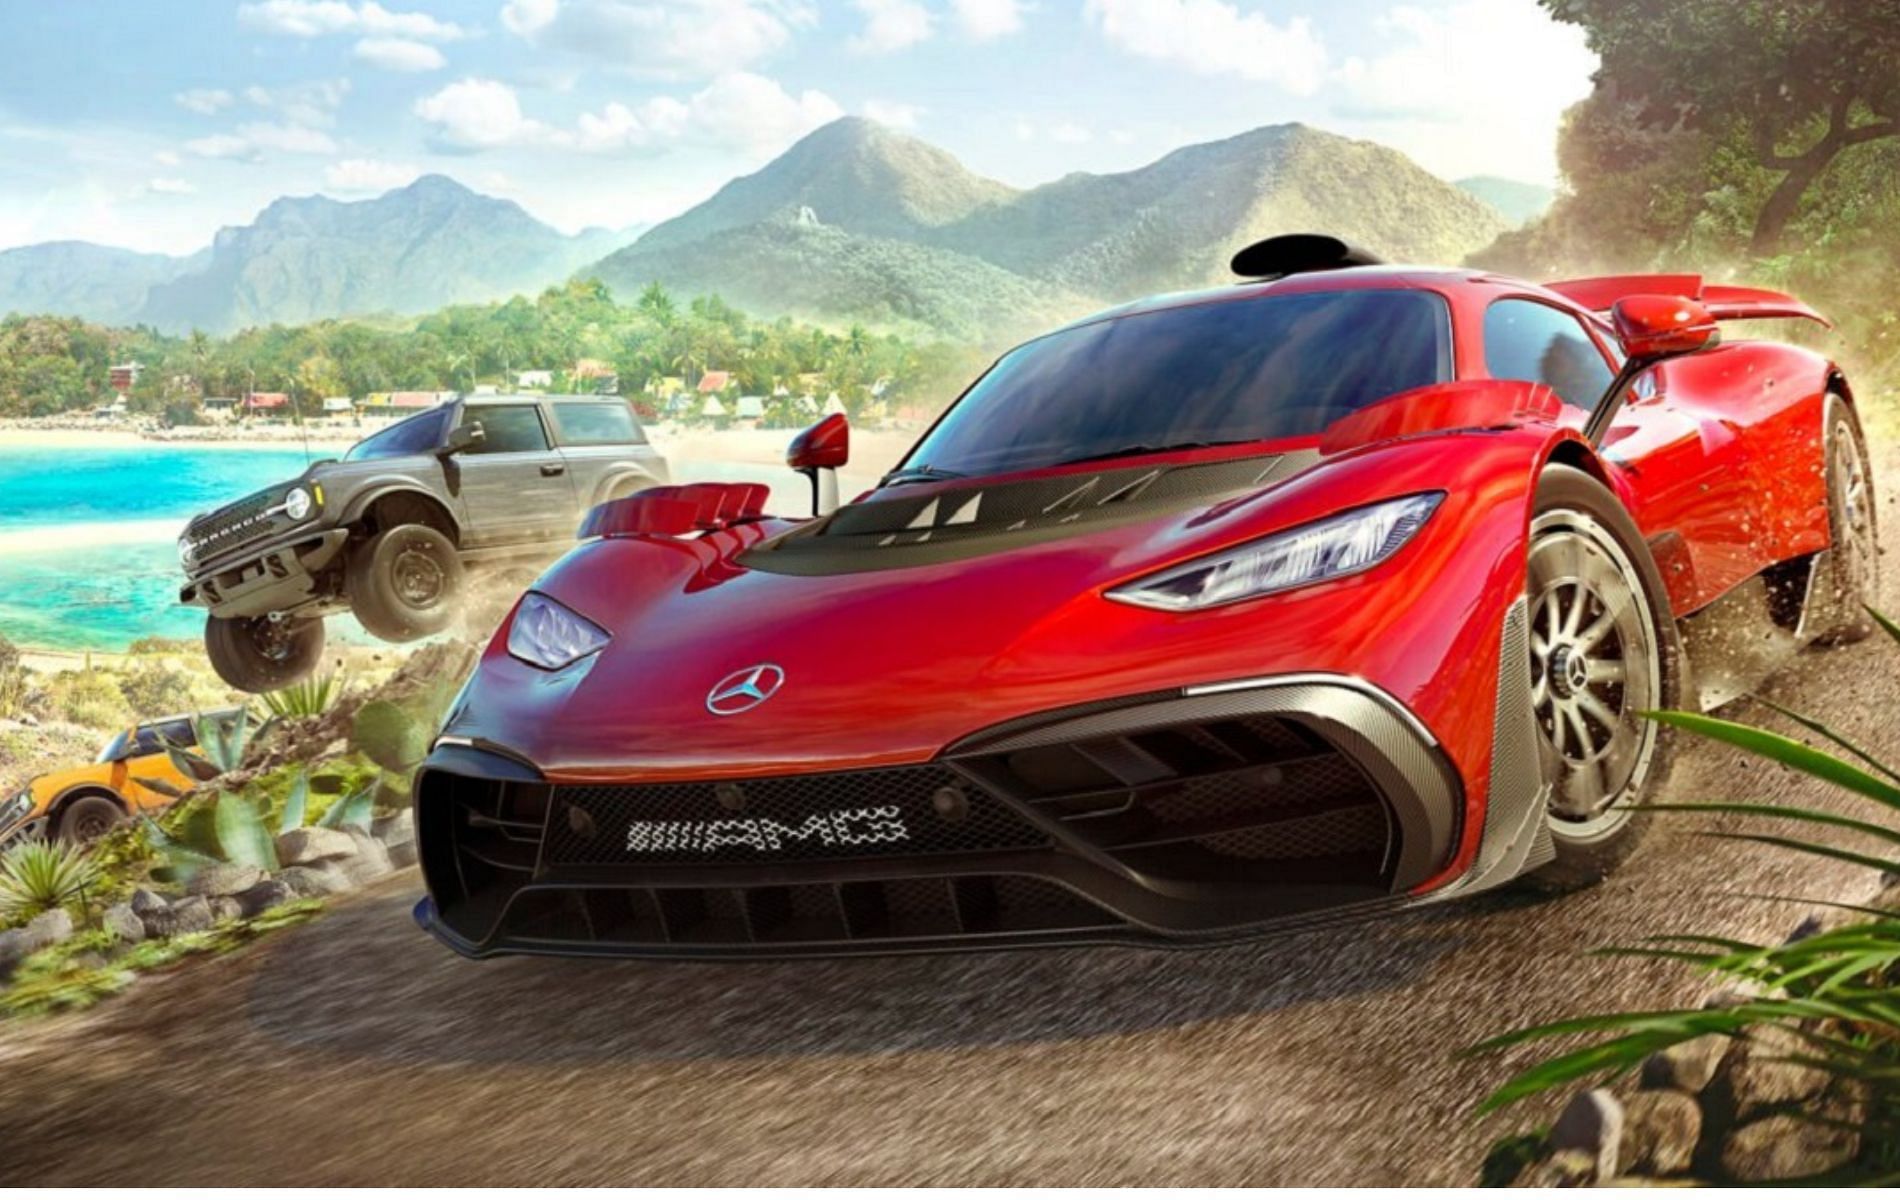 Forza Horizon produces some of the most visually appealing open-world racing titles (Image via Playground Games)